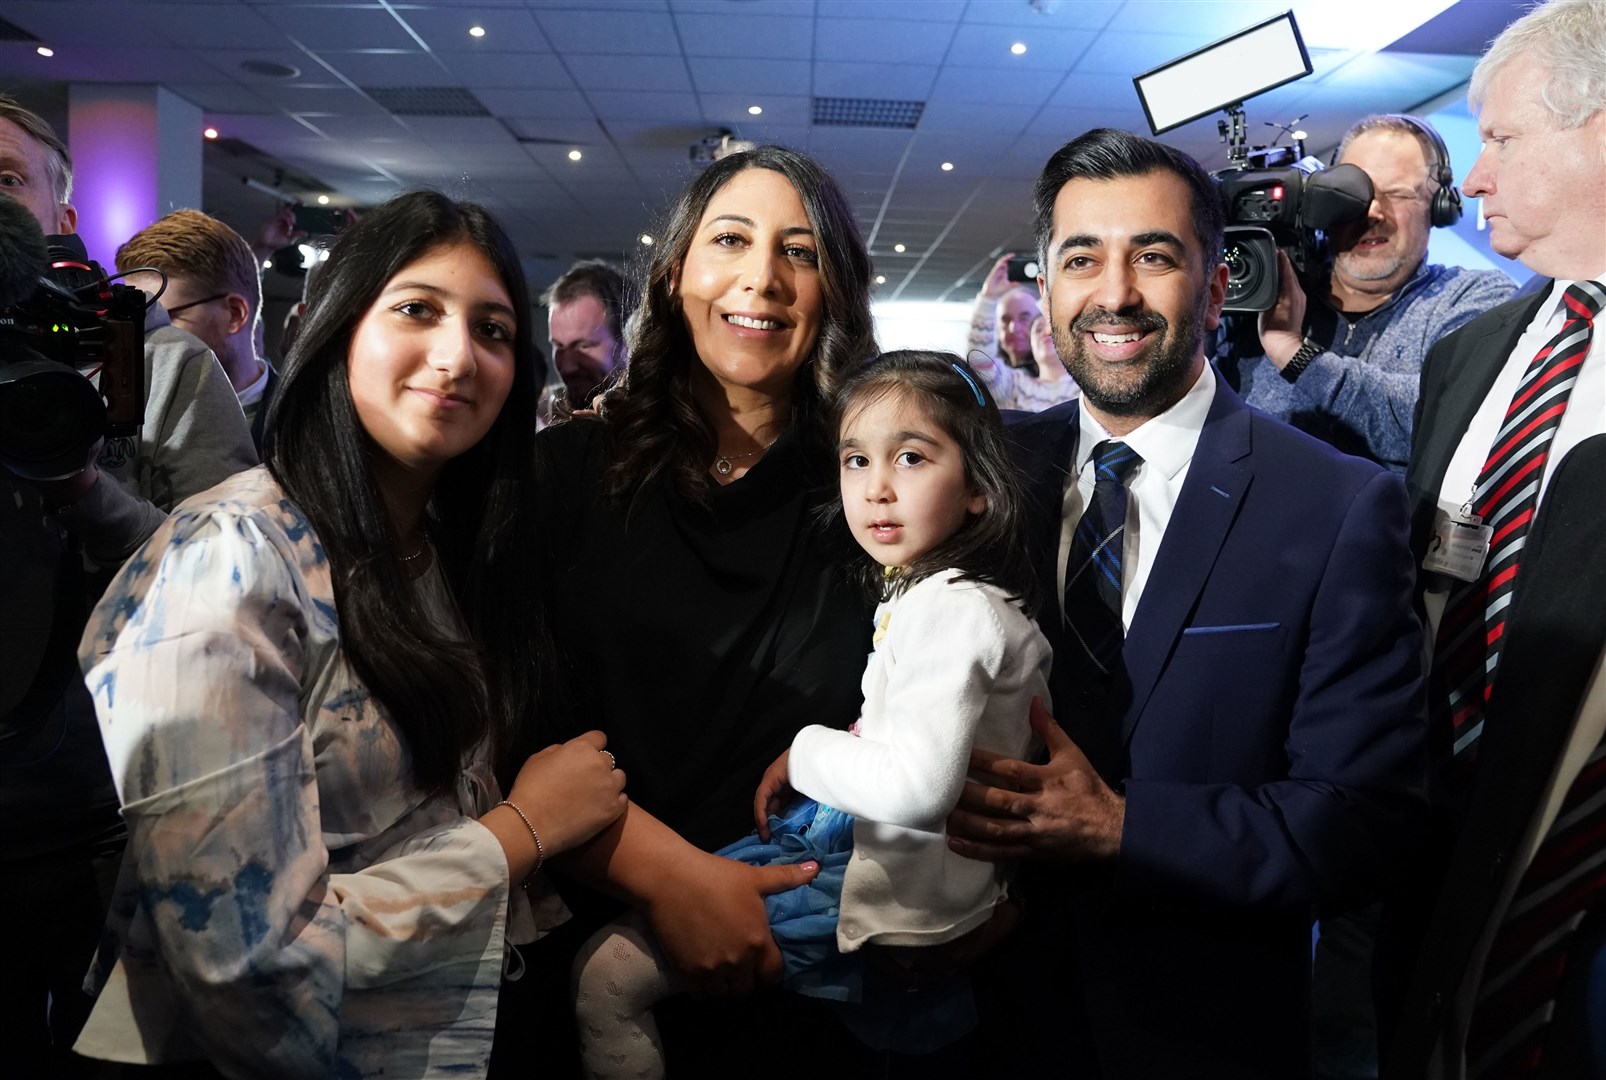 Humza Yousaf with his wife Nadia El-Nakla, young daughter Amal and step-daughter following the SNP leadership election (Andrew Milligan/PA)